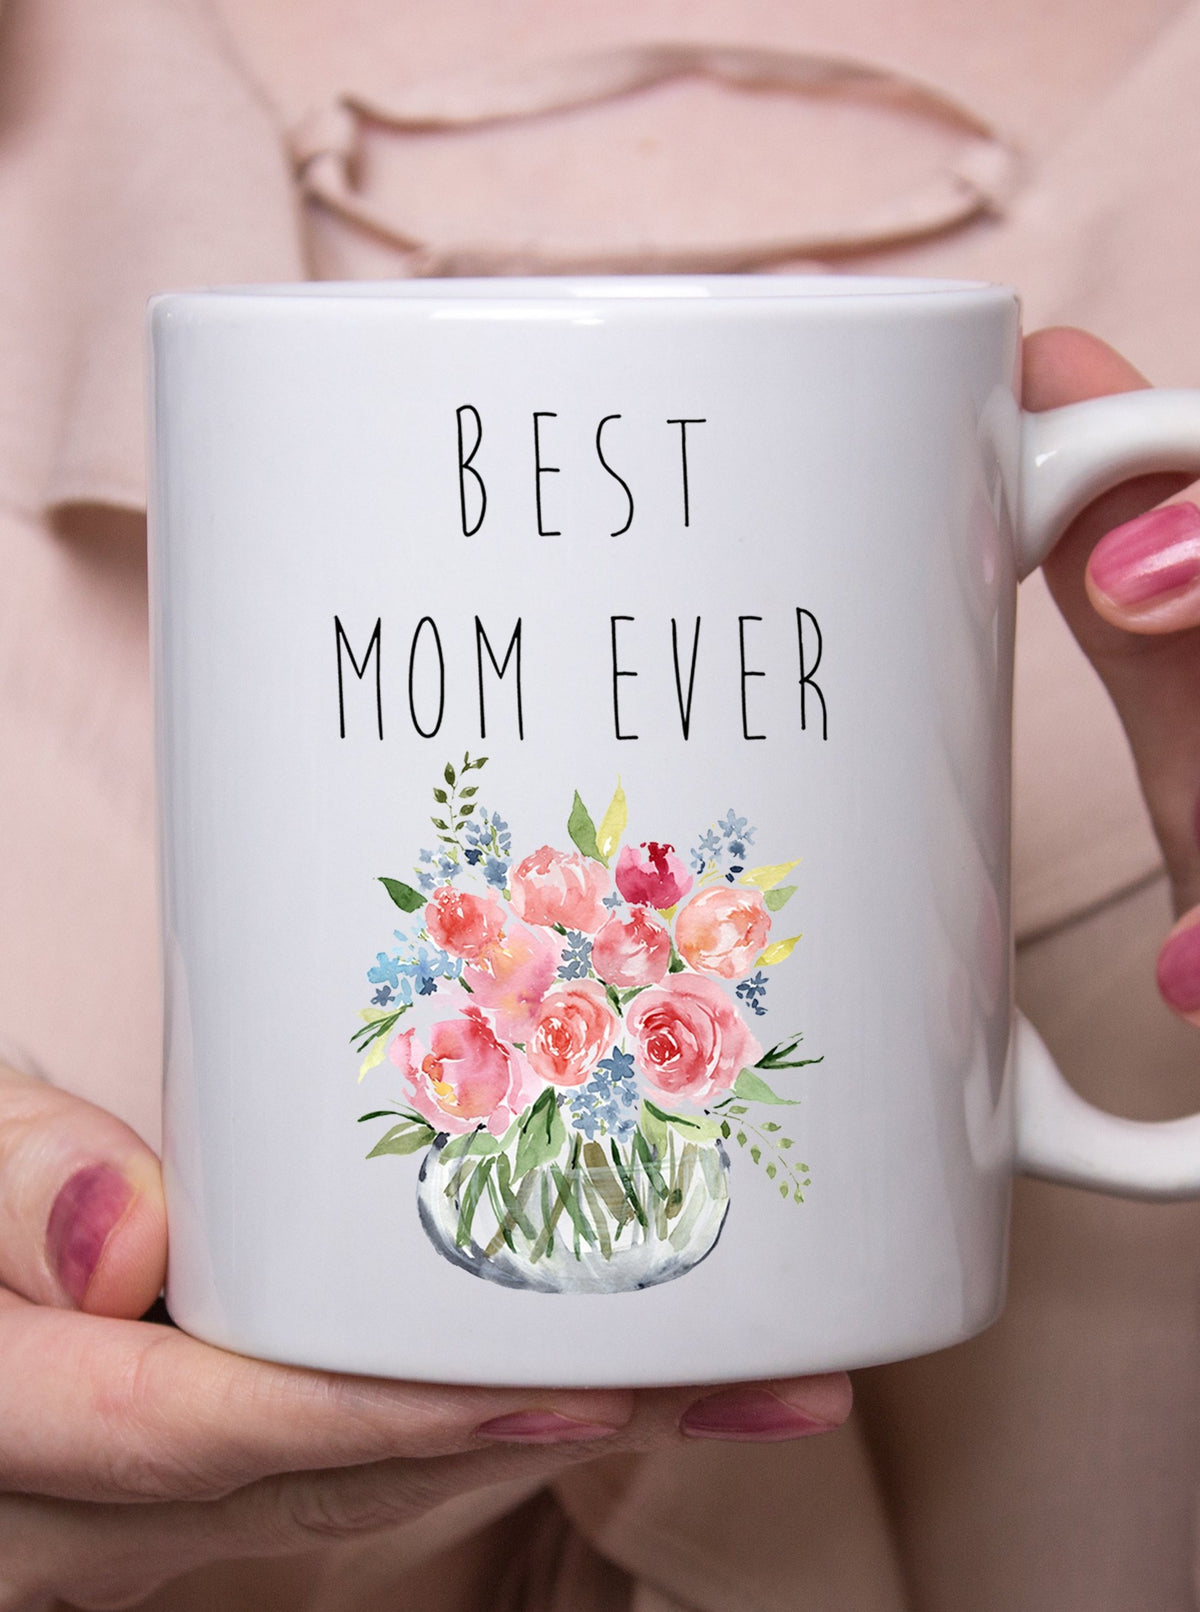 Best Mom Ever Mother's Day Mug,Happy Mother's Day Gift,Gift for Mom,Mom Floral Spring Coffee Mug,Mother's Day Mug for friend,Made in USA